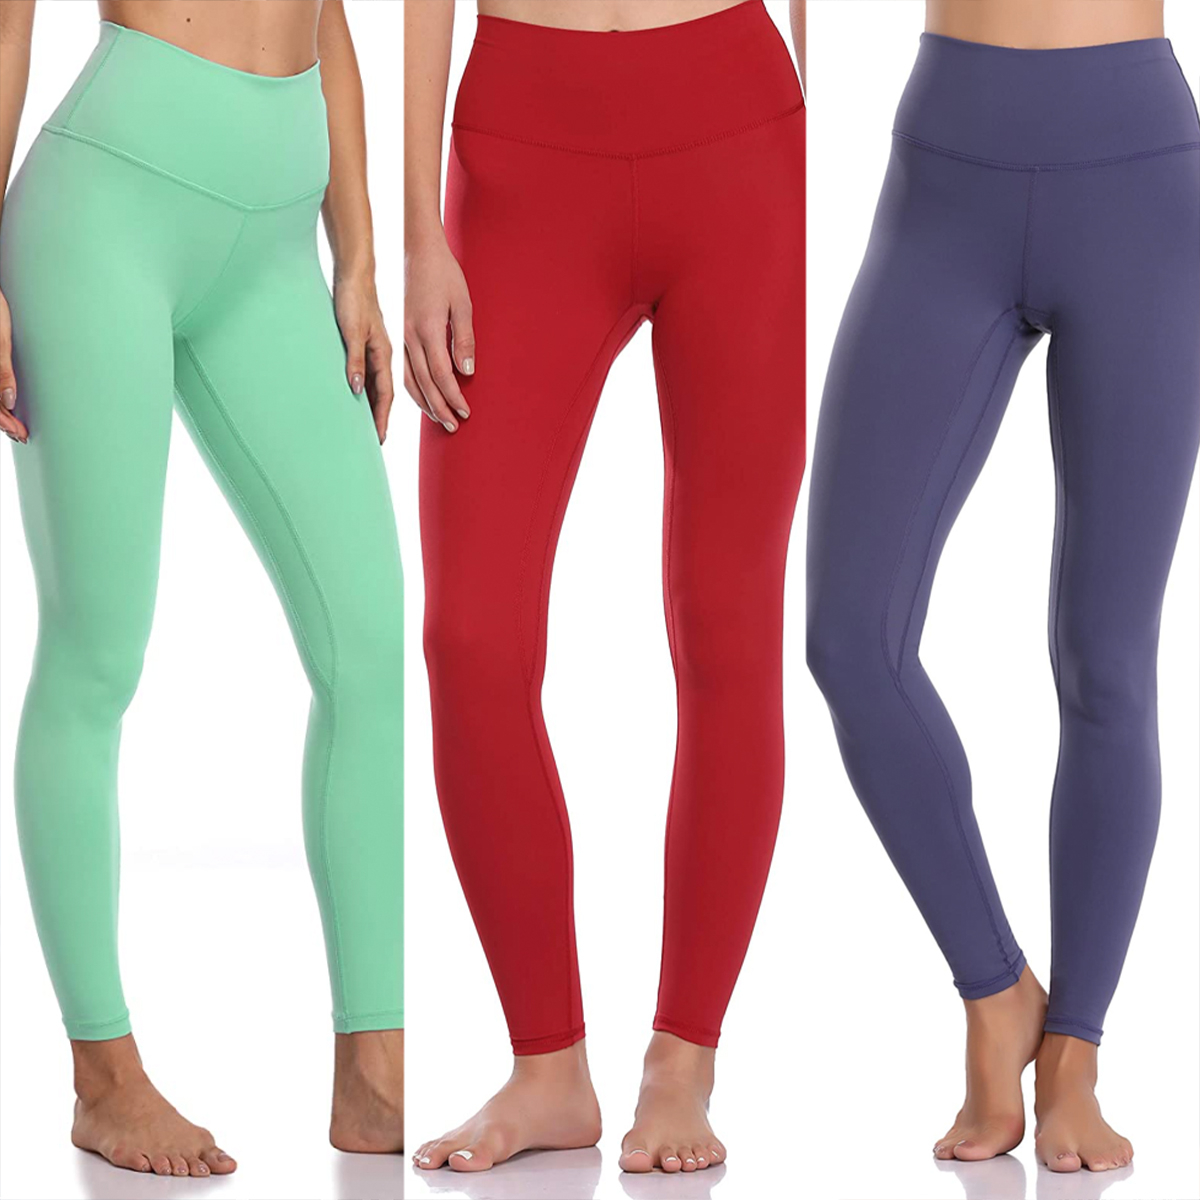 Lululemon Will Give You Free Leggings in Exchange for Your 'Dupes' -  Fashionista